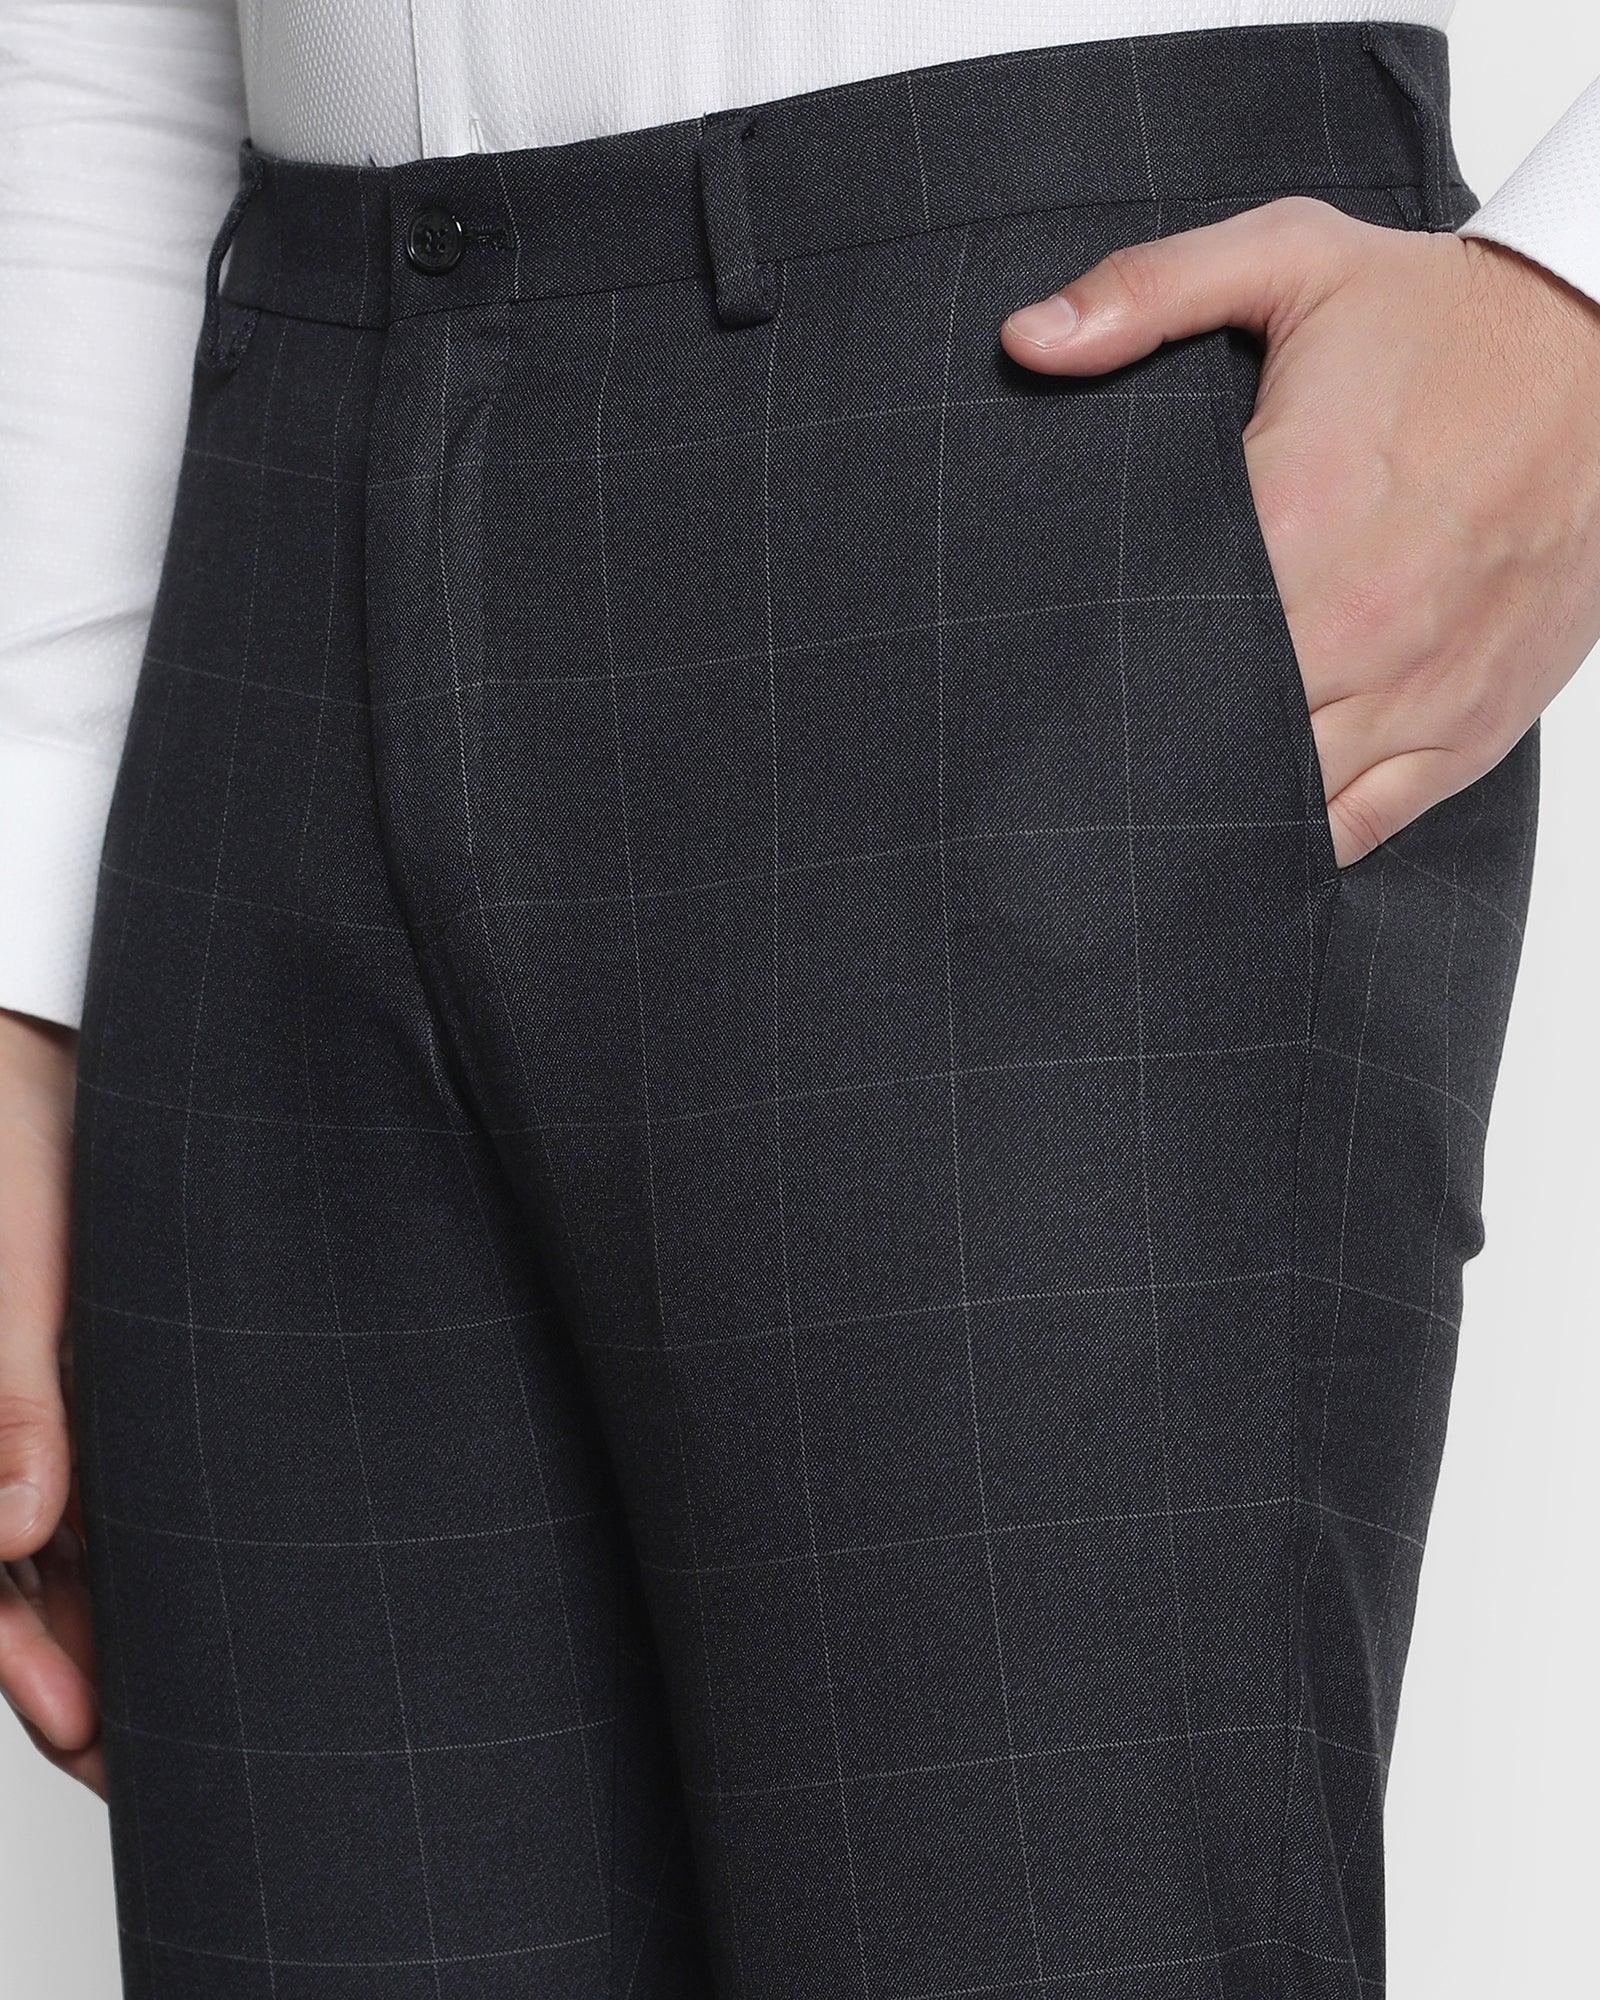 Slim Fit B-91 Formal Blue Check Trouser - Berry